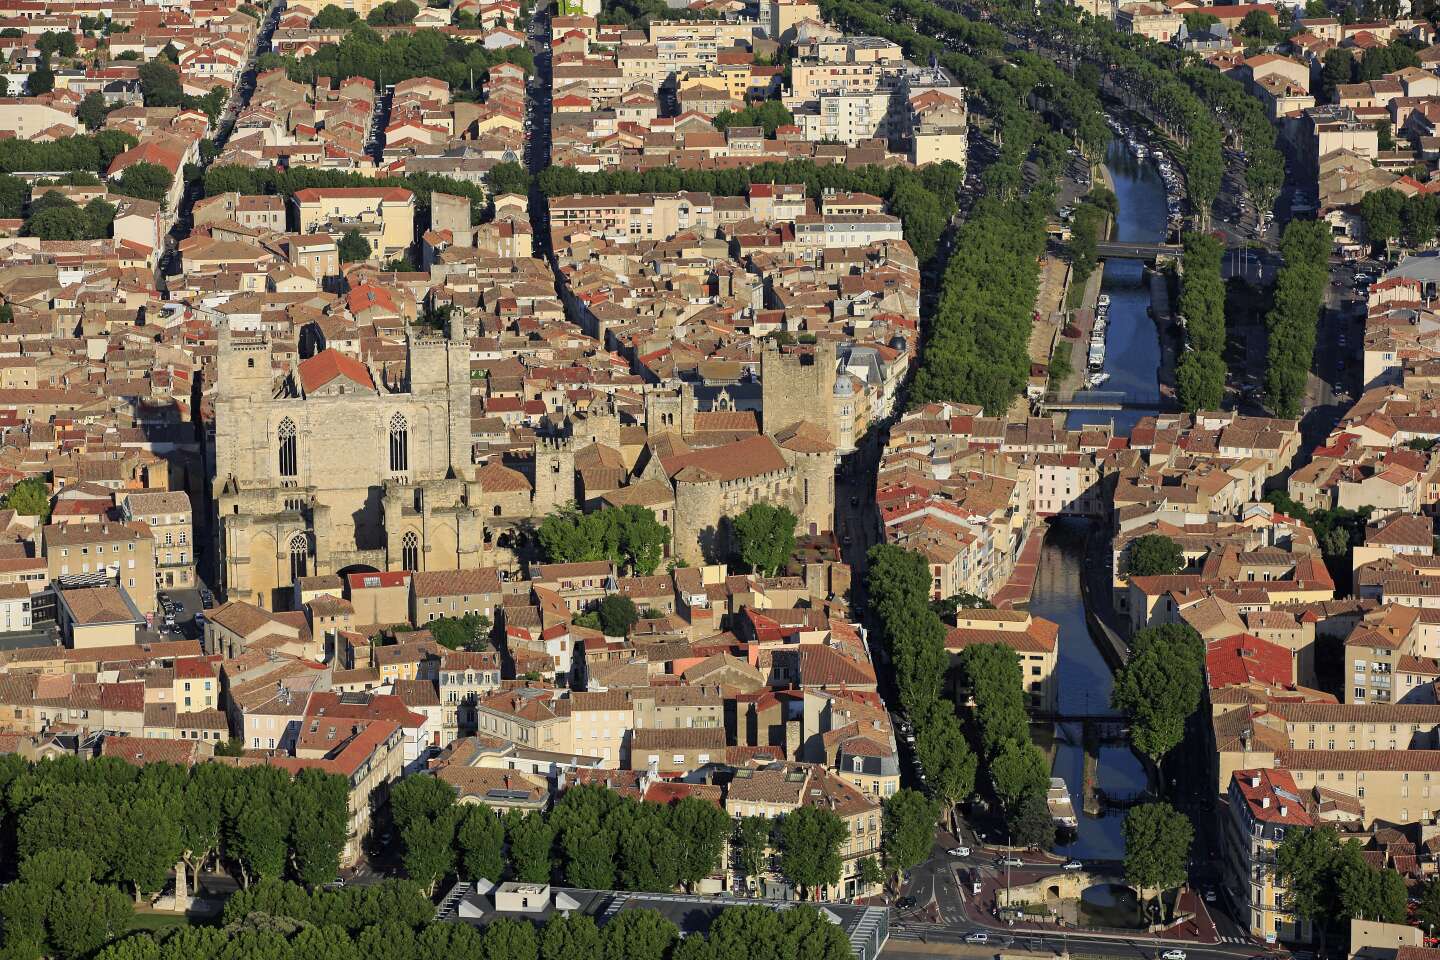 The real estate market remains dynamic in Narbonne